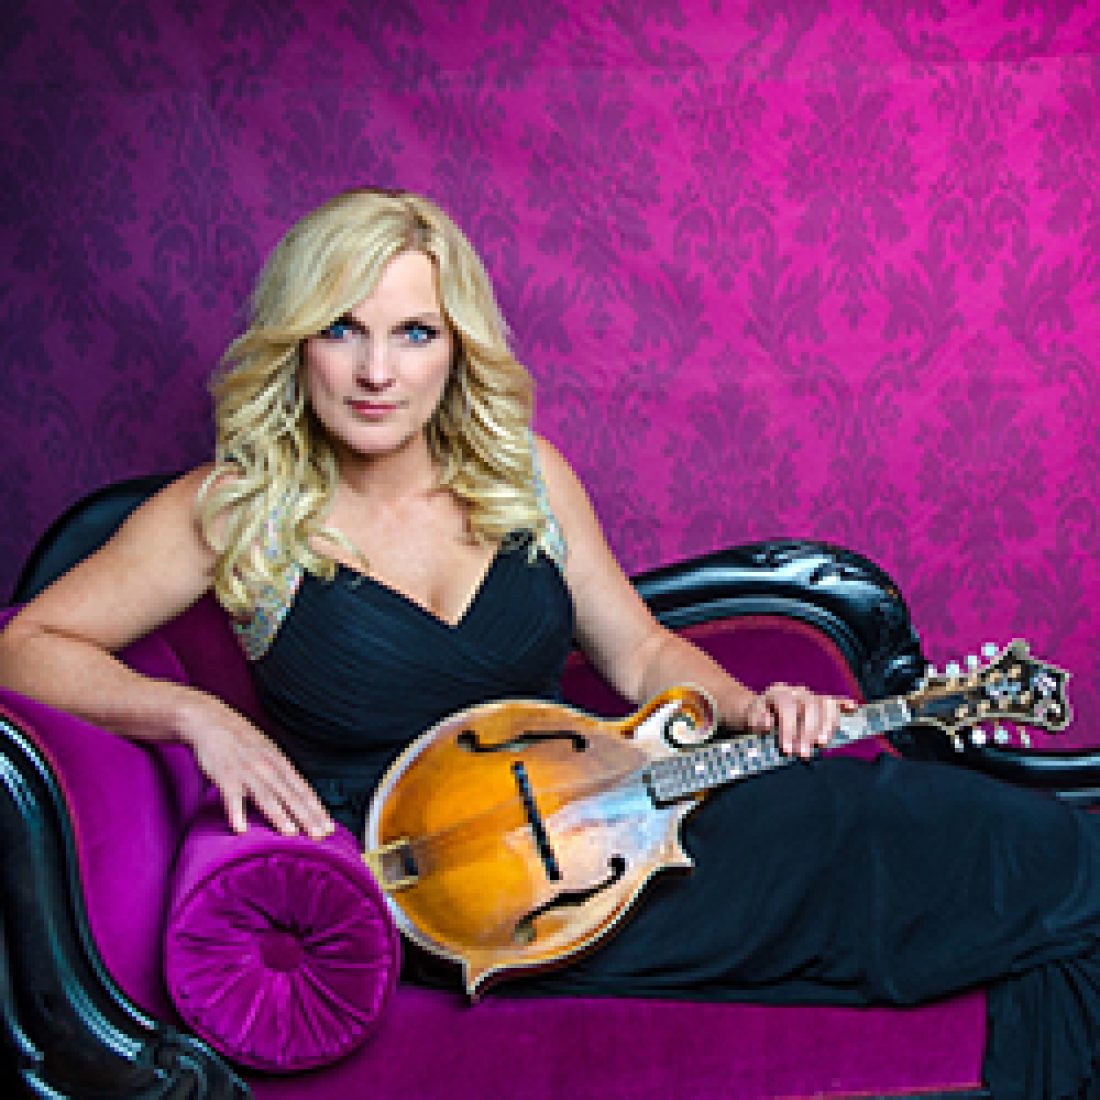 Country singer Rhonda Vincent poses holding a mandolin on a fuchsia couch in front of patterned fuchsia wallpaper